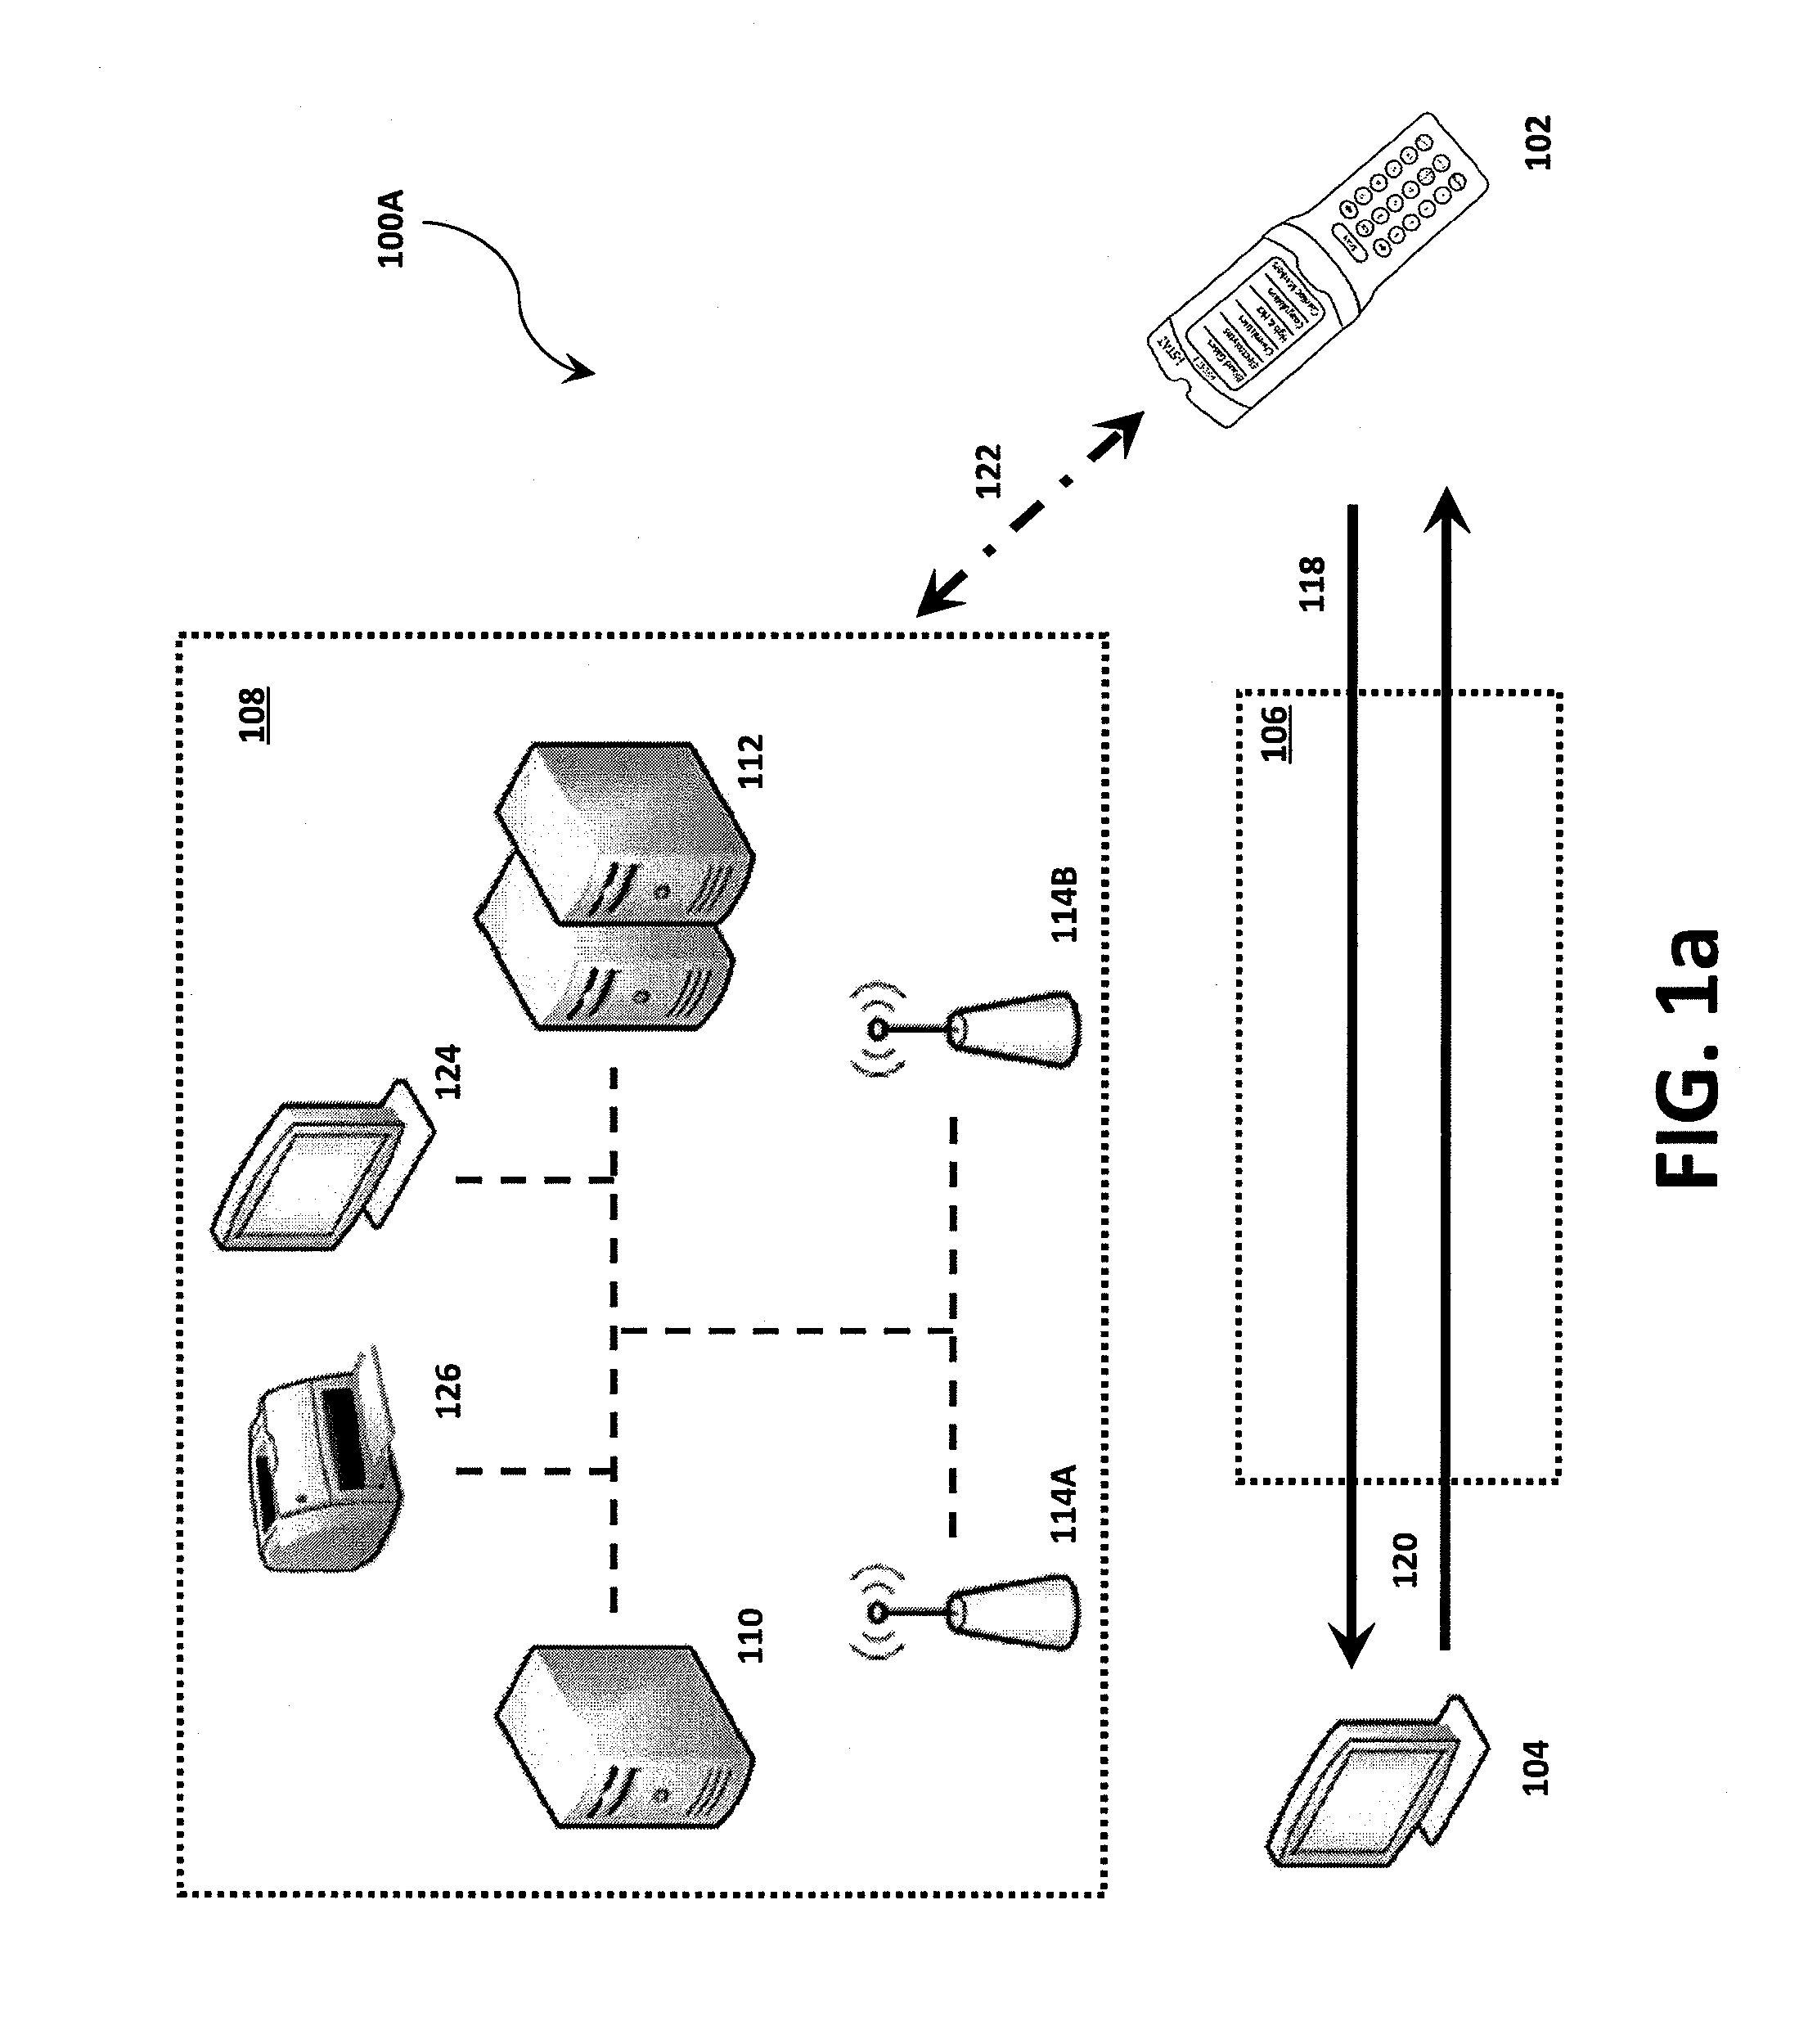 Systems, methods and analyzers for establishing a secure wireless network in point of care testing